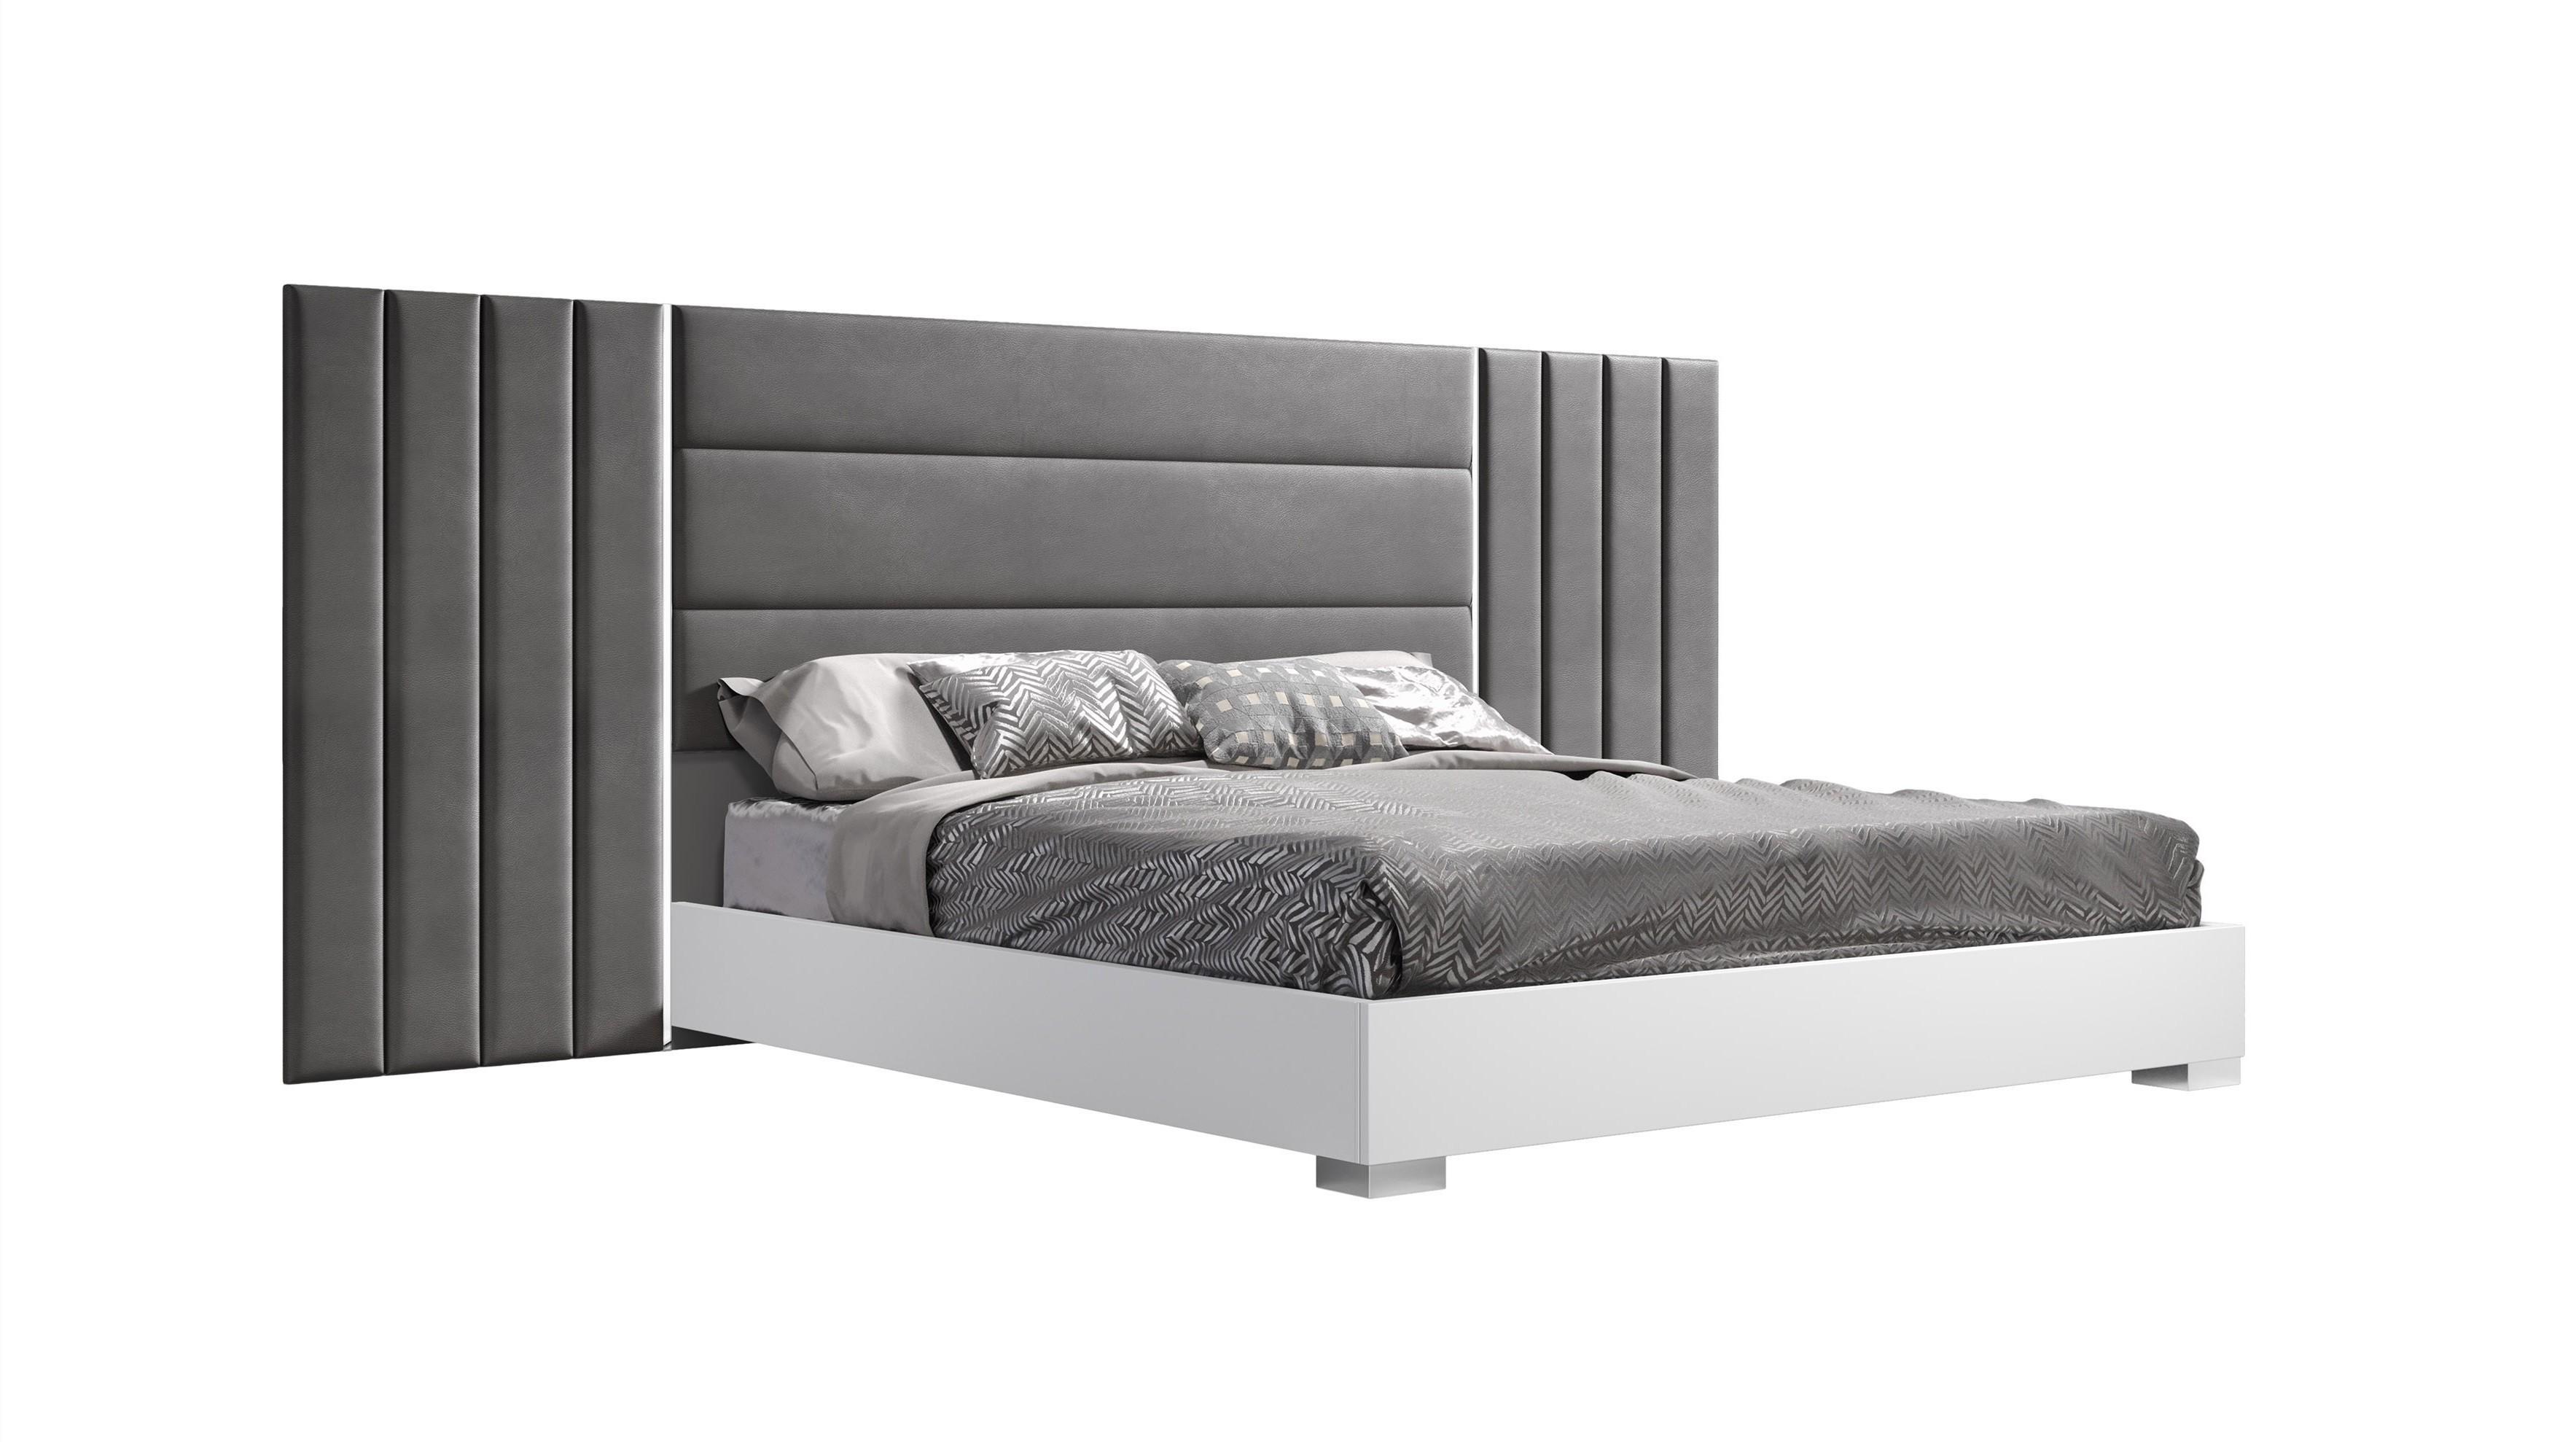 

    
Contemporary Gray and White Composite Wood King Bed J&M Furniture Nina 18332-K
